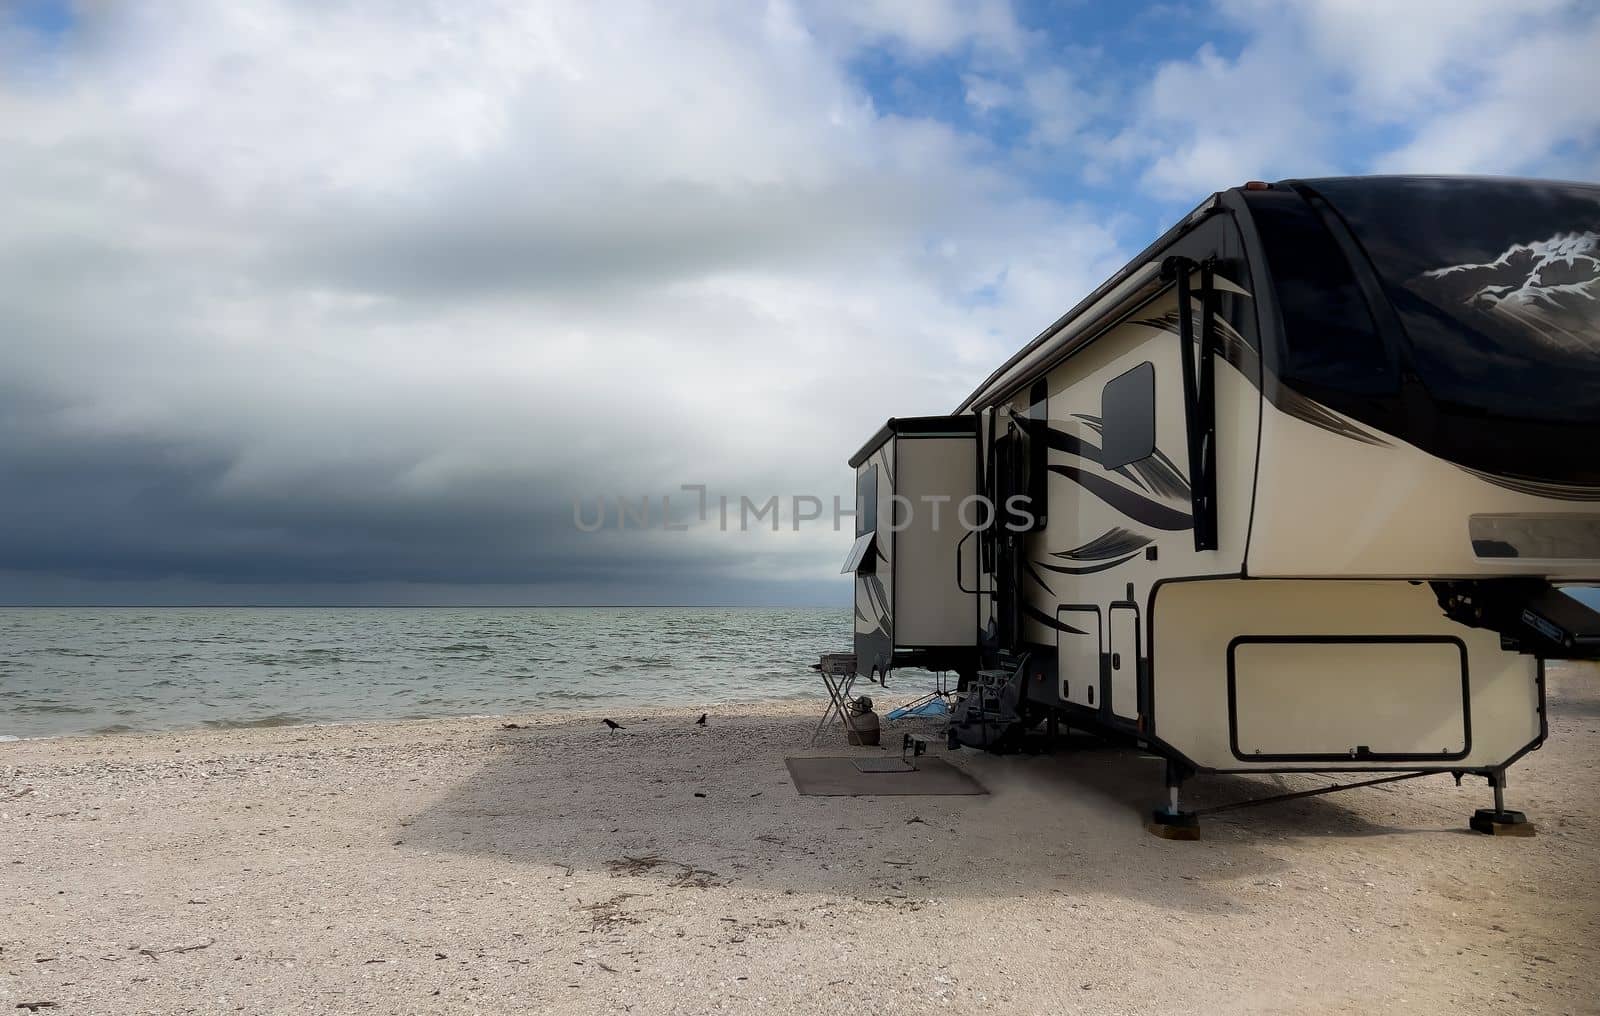 Rv Camping on the Beach by lisaldw